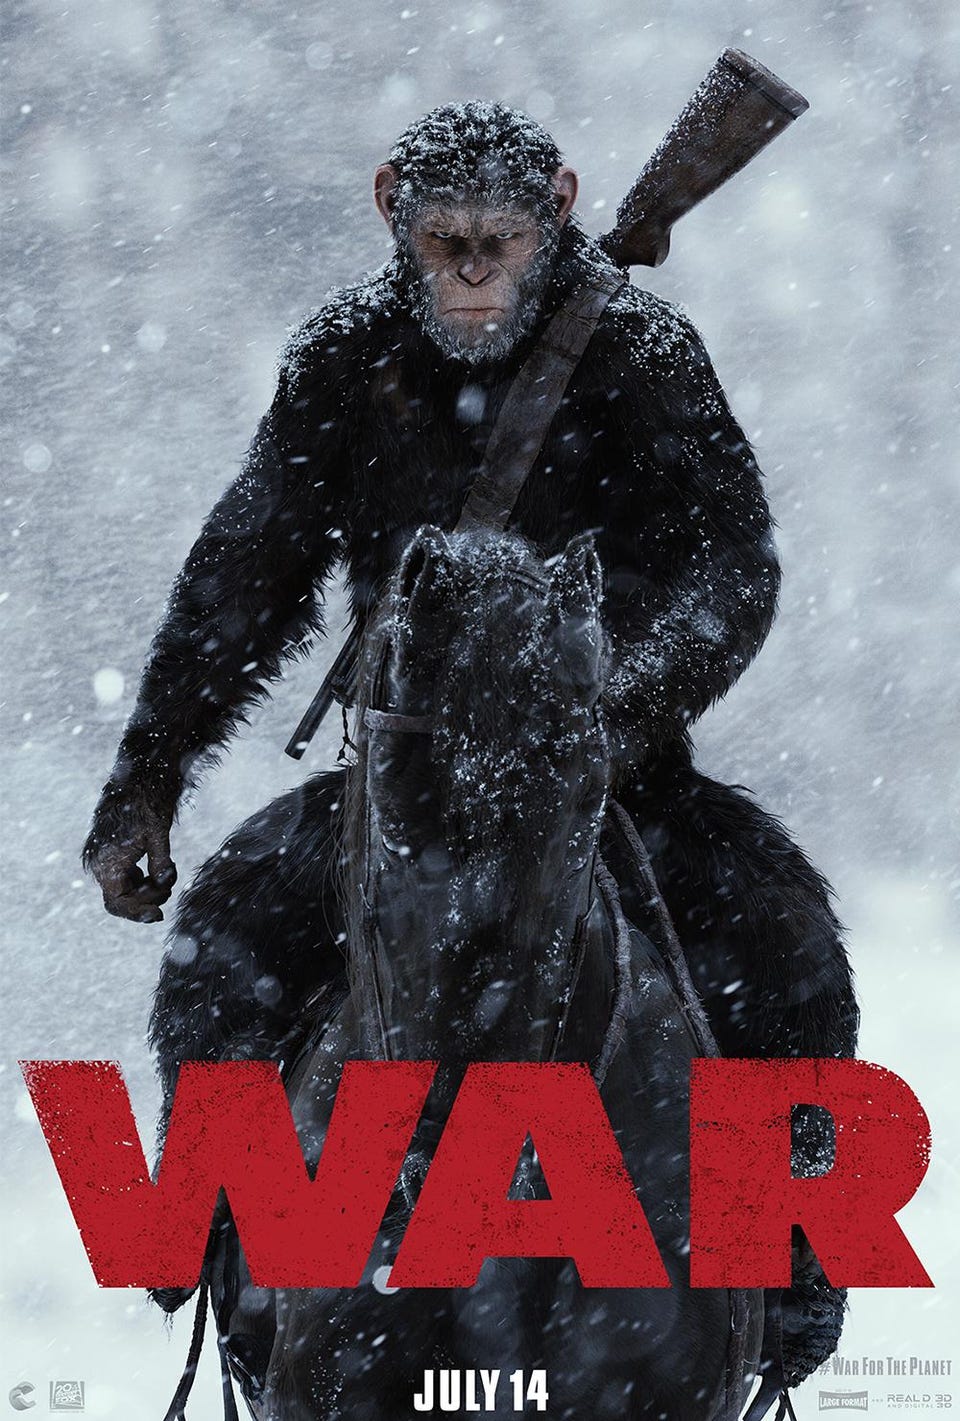 War For The Planet Of The Apes Final Poster Wallpapers